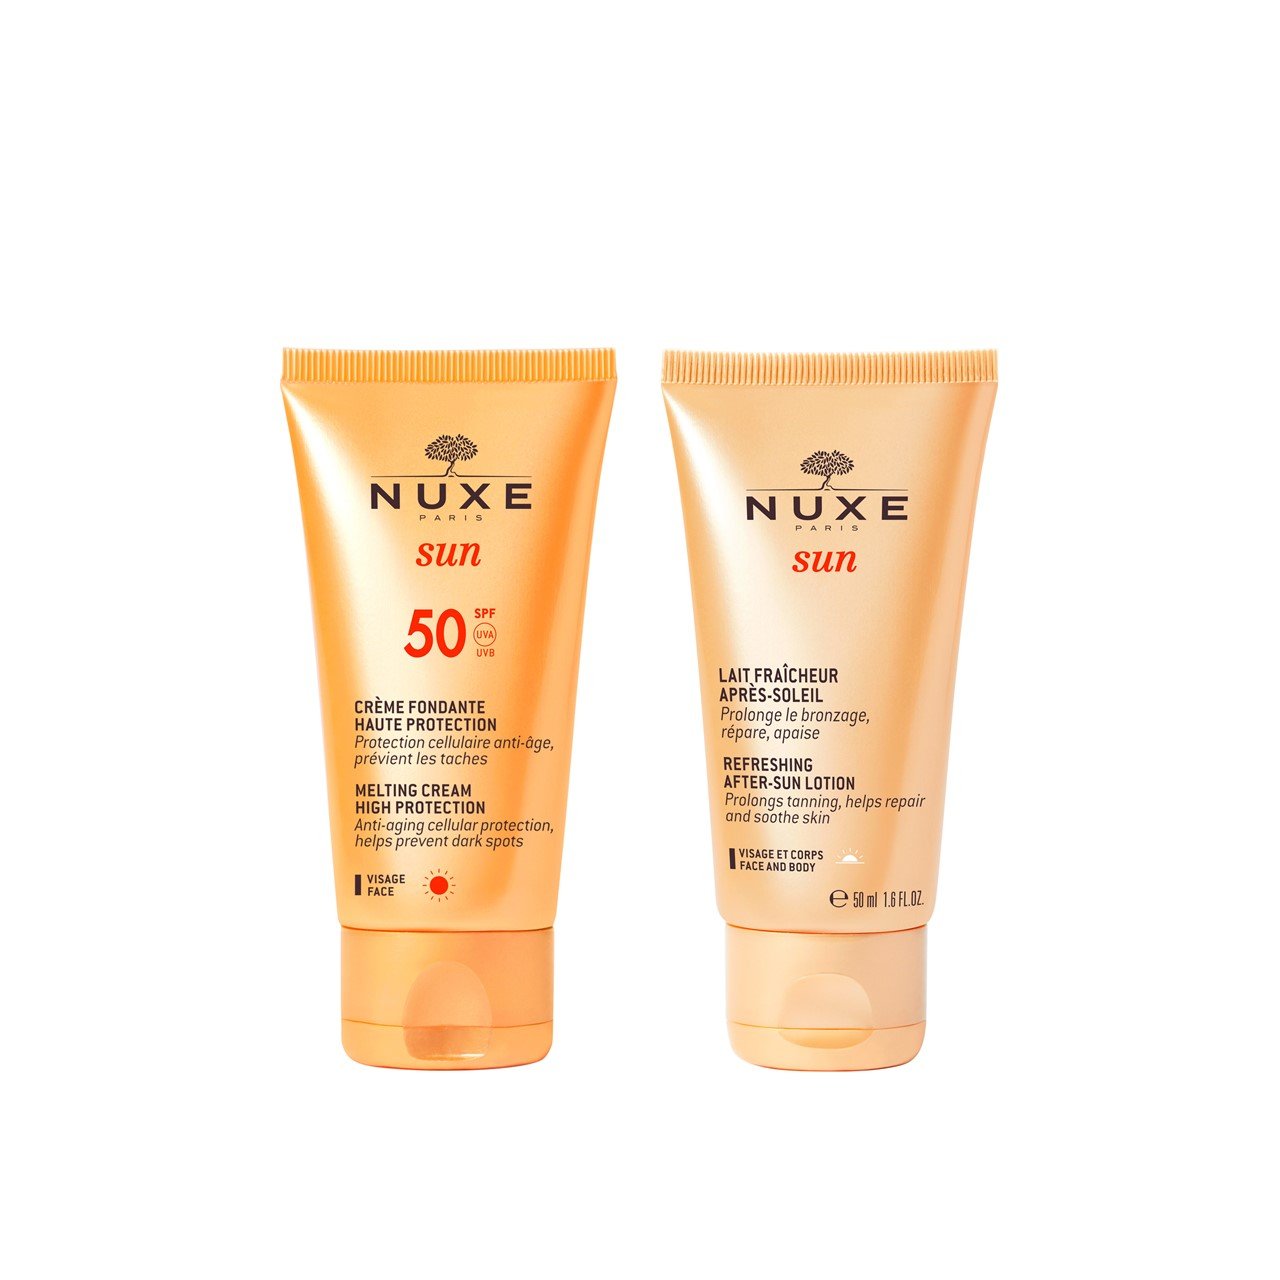 NUXE Sun Melting Cream SPF50 50ml + Refreshing After-Sun Lotion 50ml